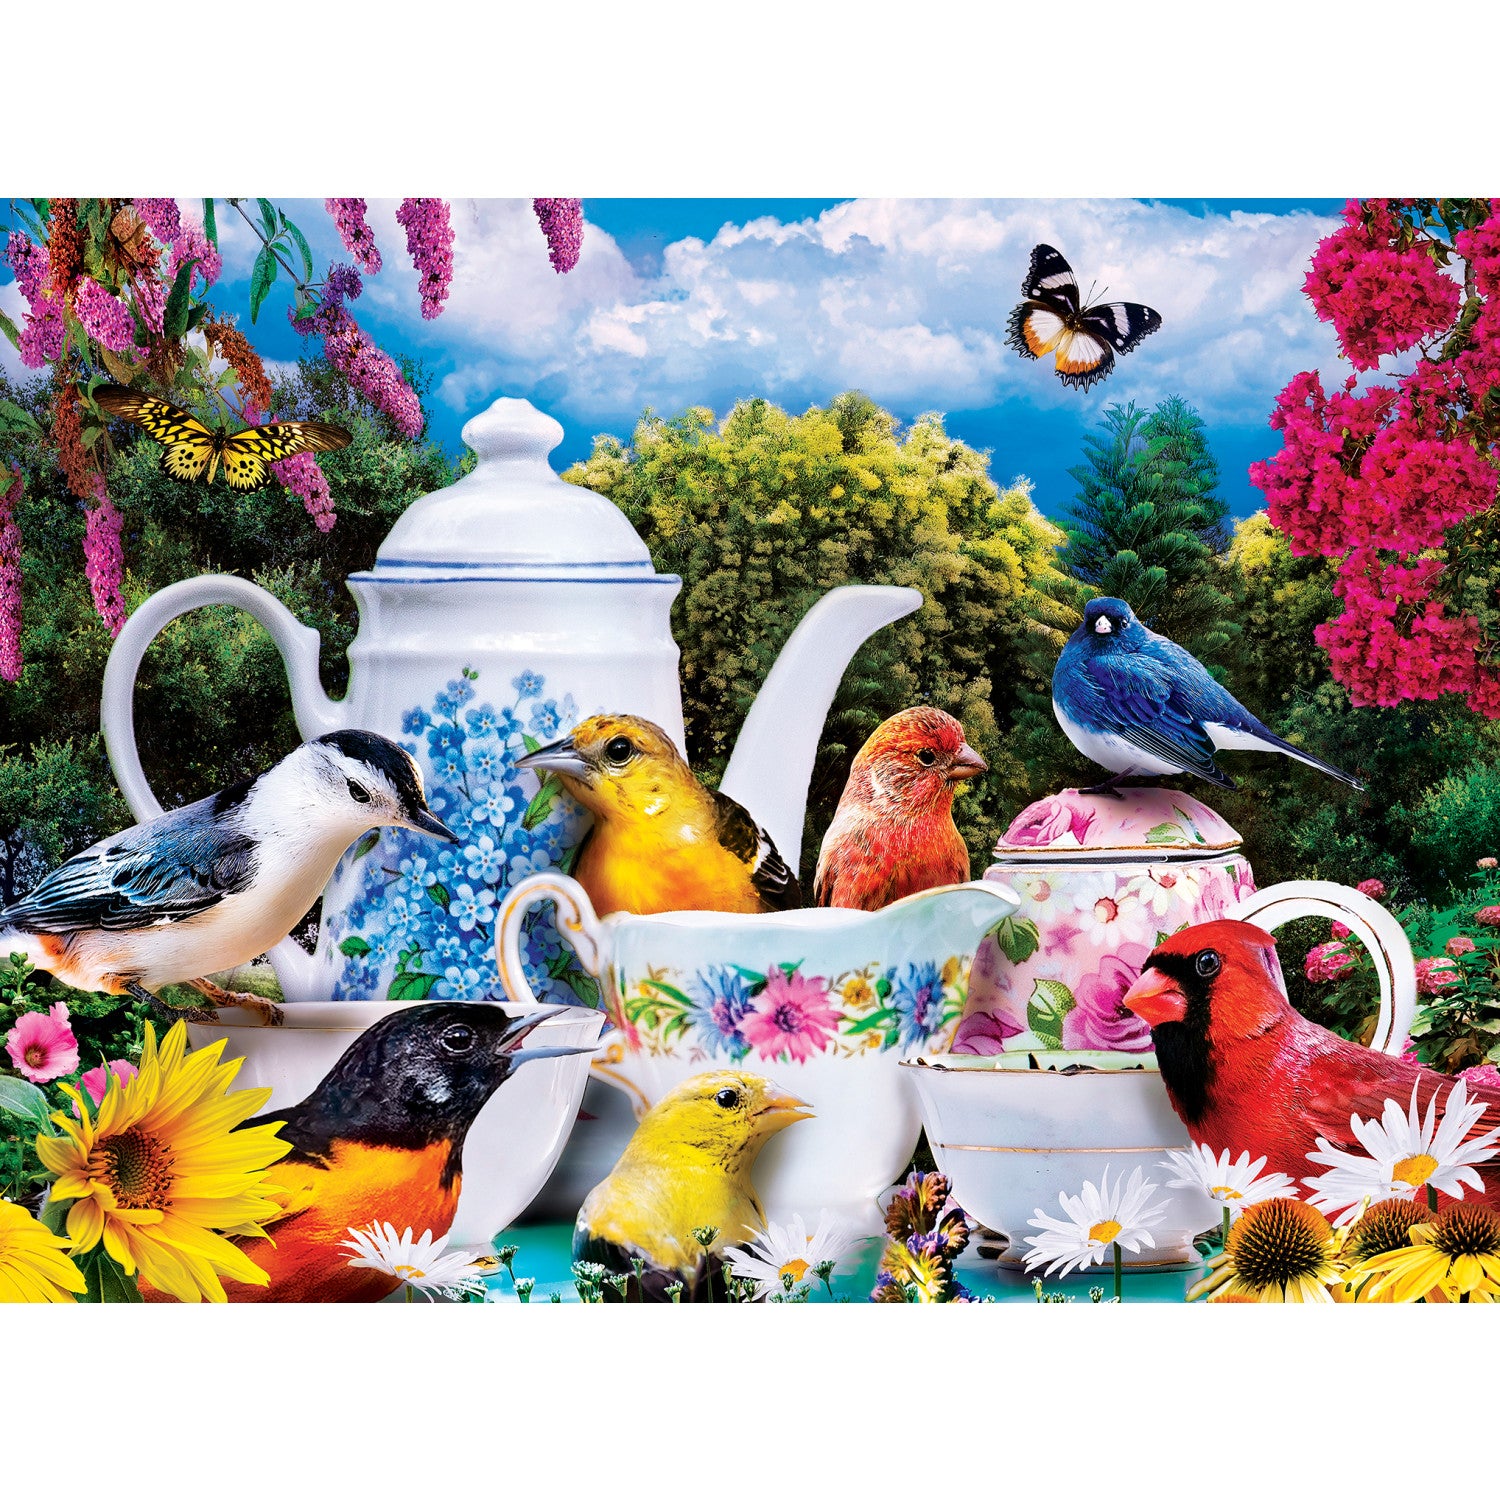 Wild & Whimsical - 500 Piece Jigsaw Puzzles 4 Pack